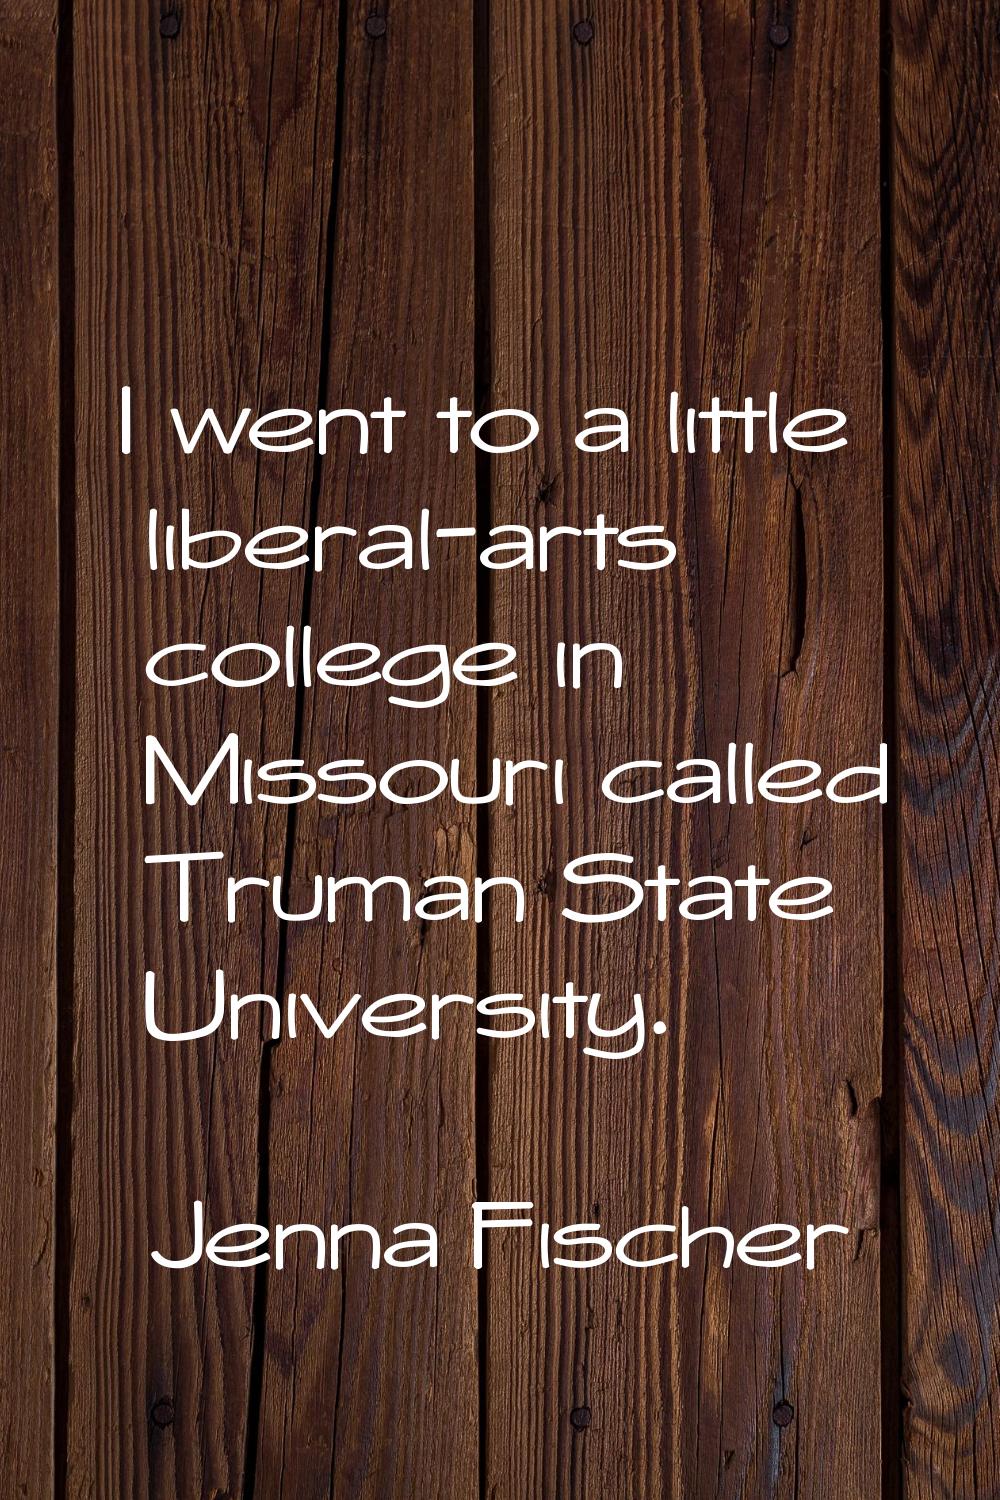 I went to a little liberal-arts college in Missouri called Truman State University.